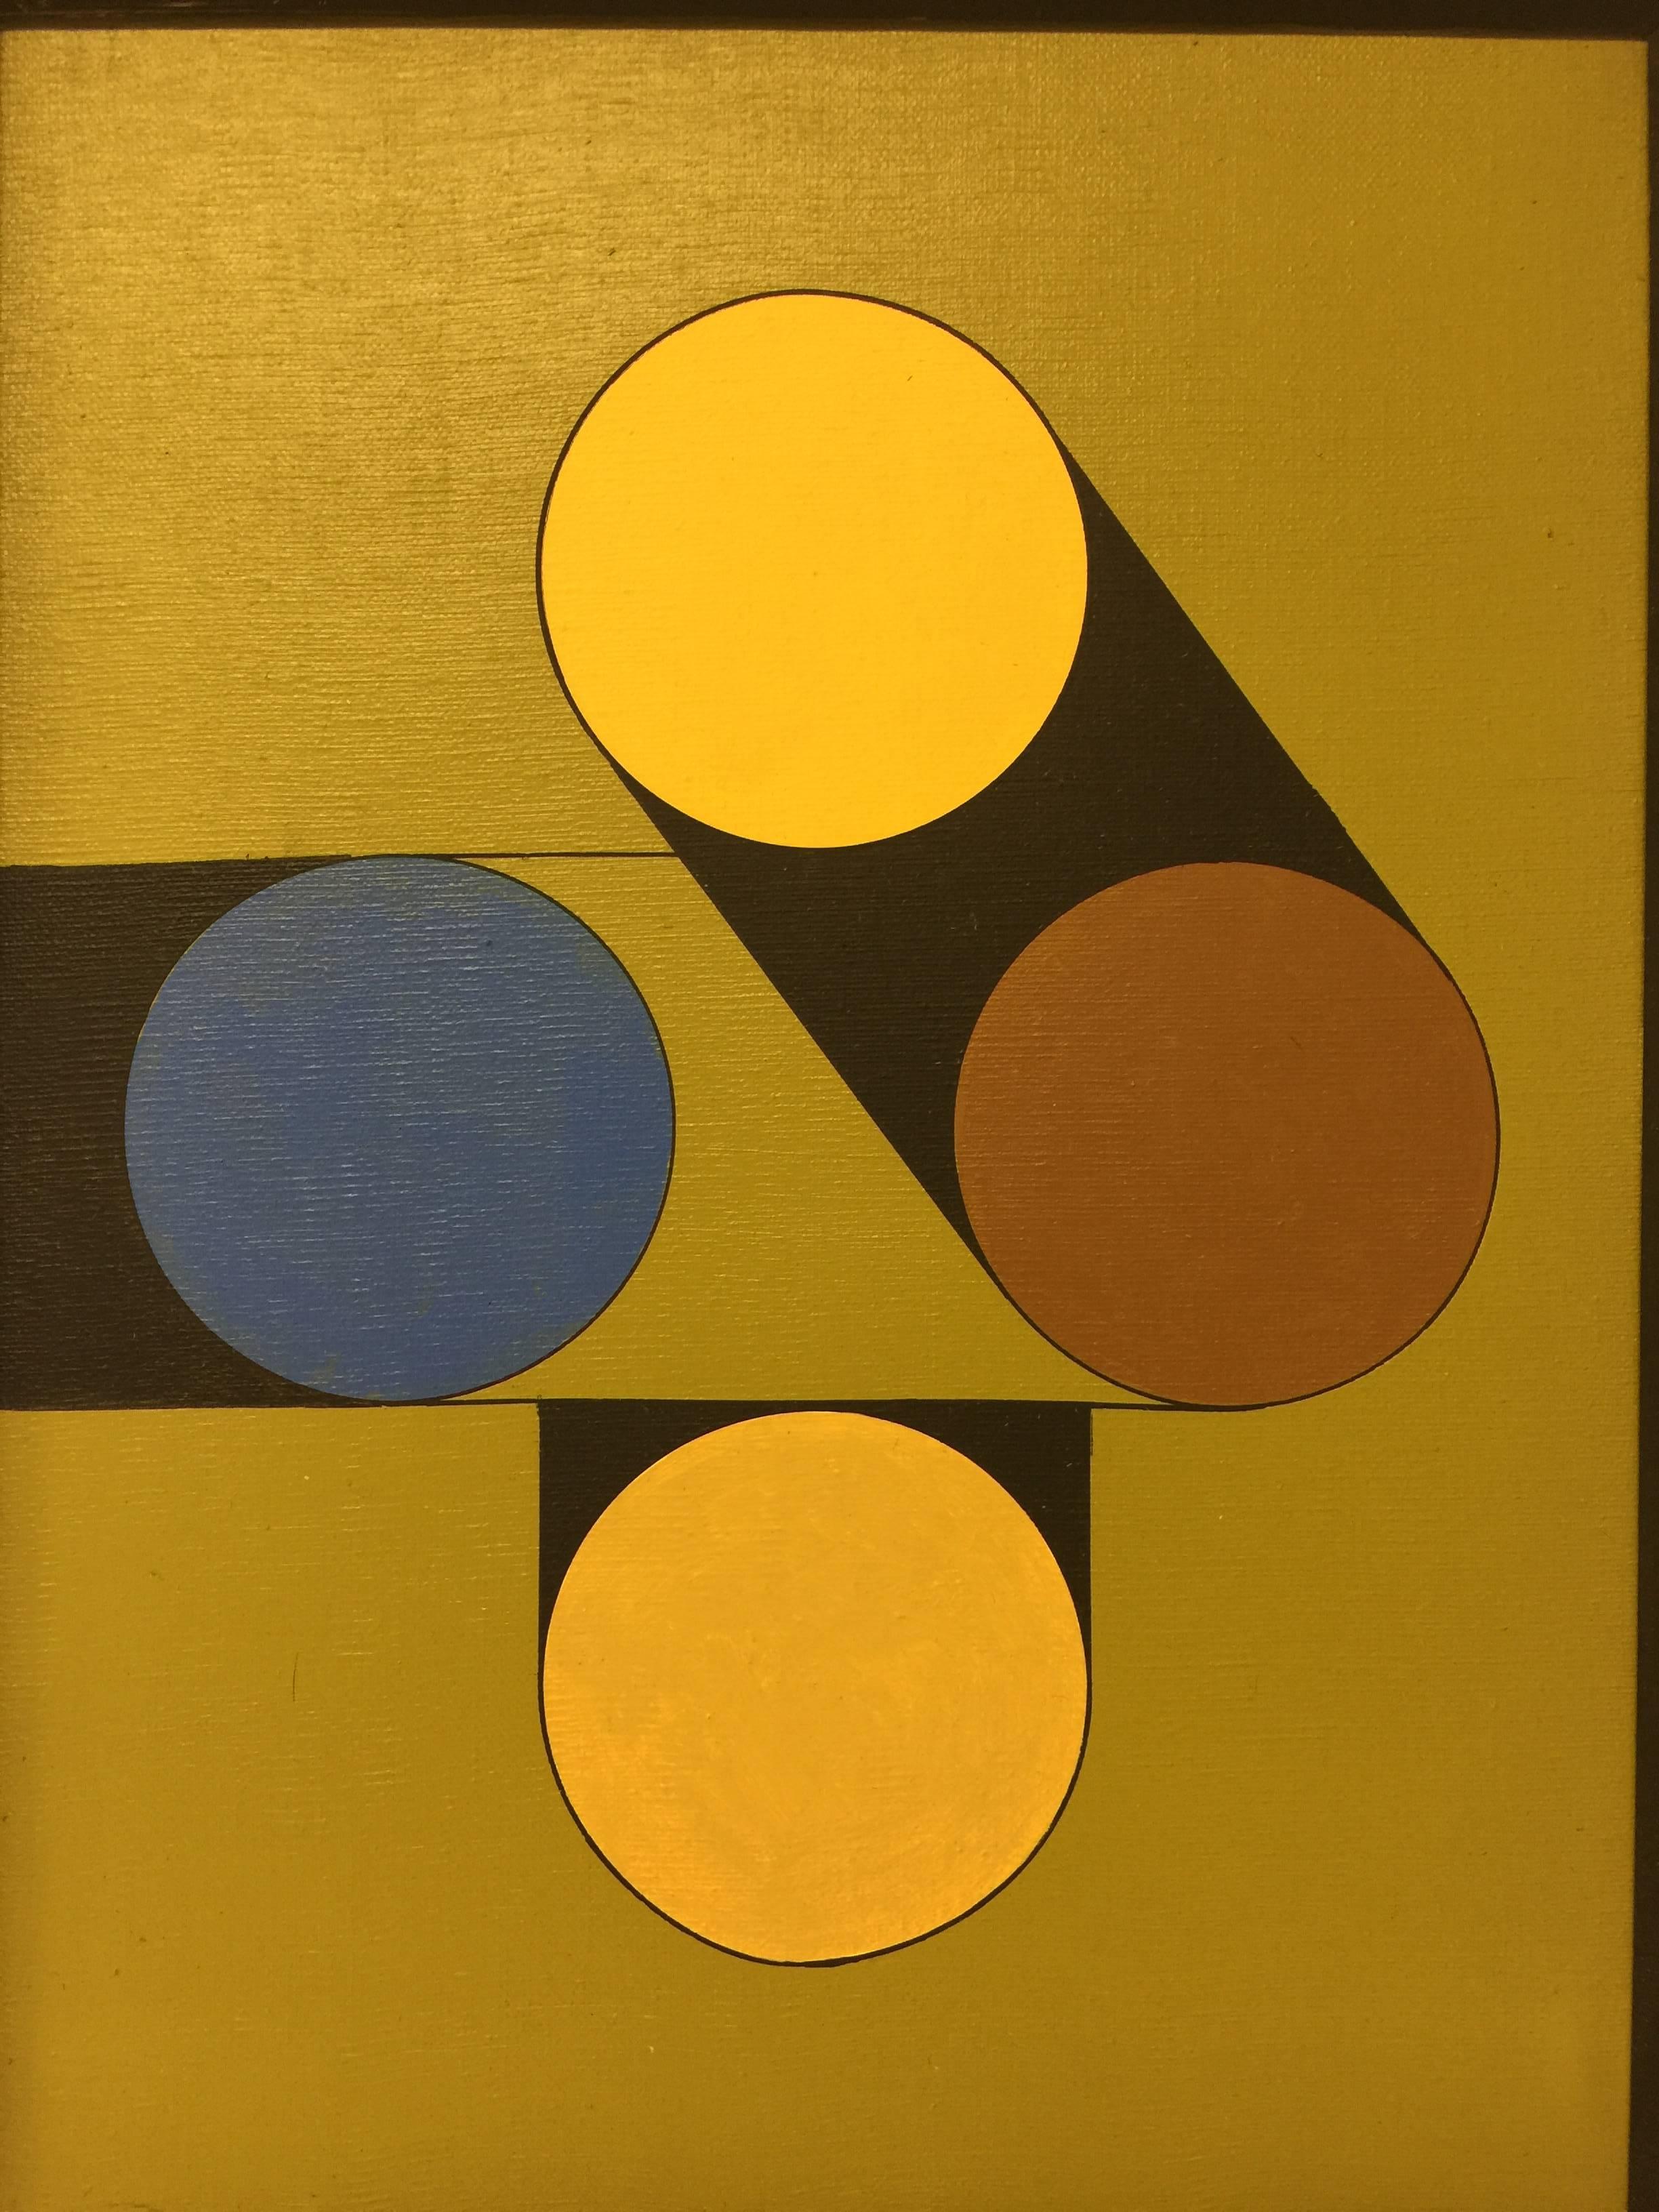 This is one of a collection of five vintage hard edge geometric abstraction paintings, dating to circa 1980s. Presented in the original wood frame. There are numbers and letters written verso on the stretcher which may be from the artist. The work